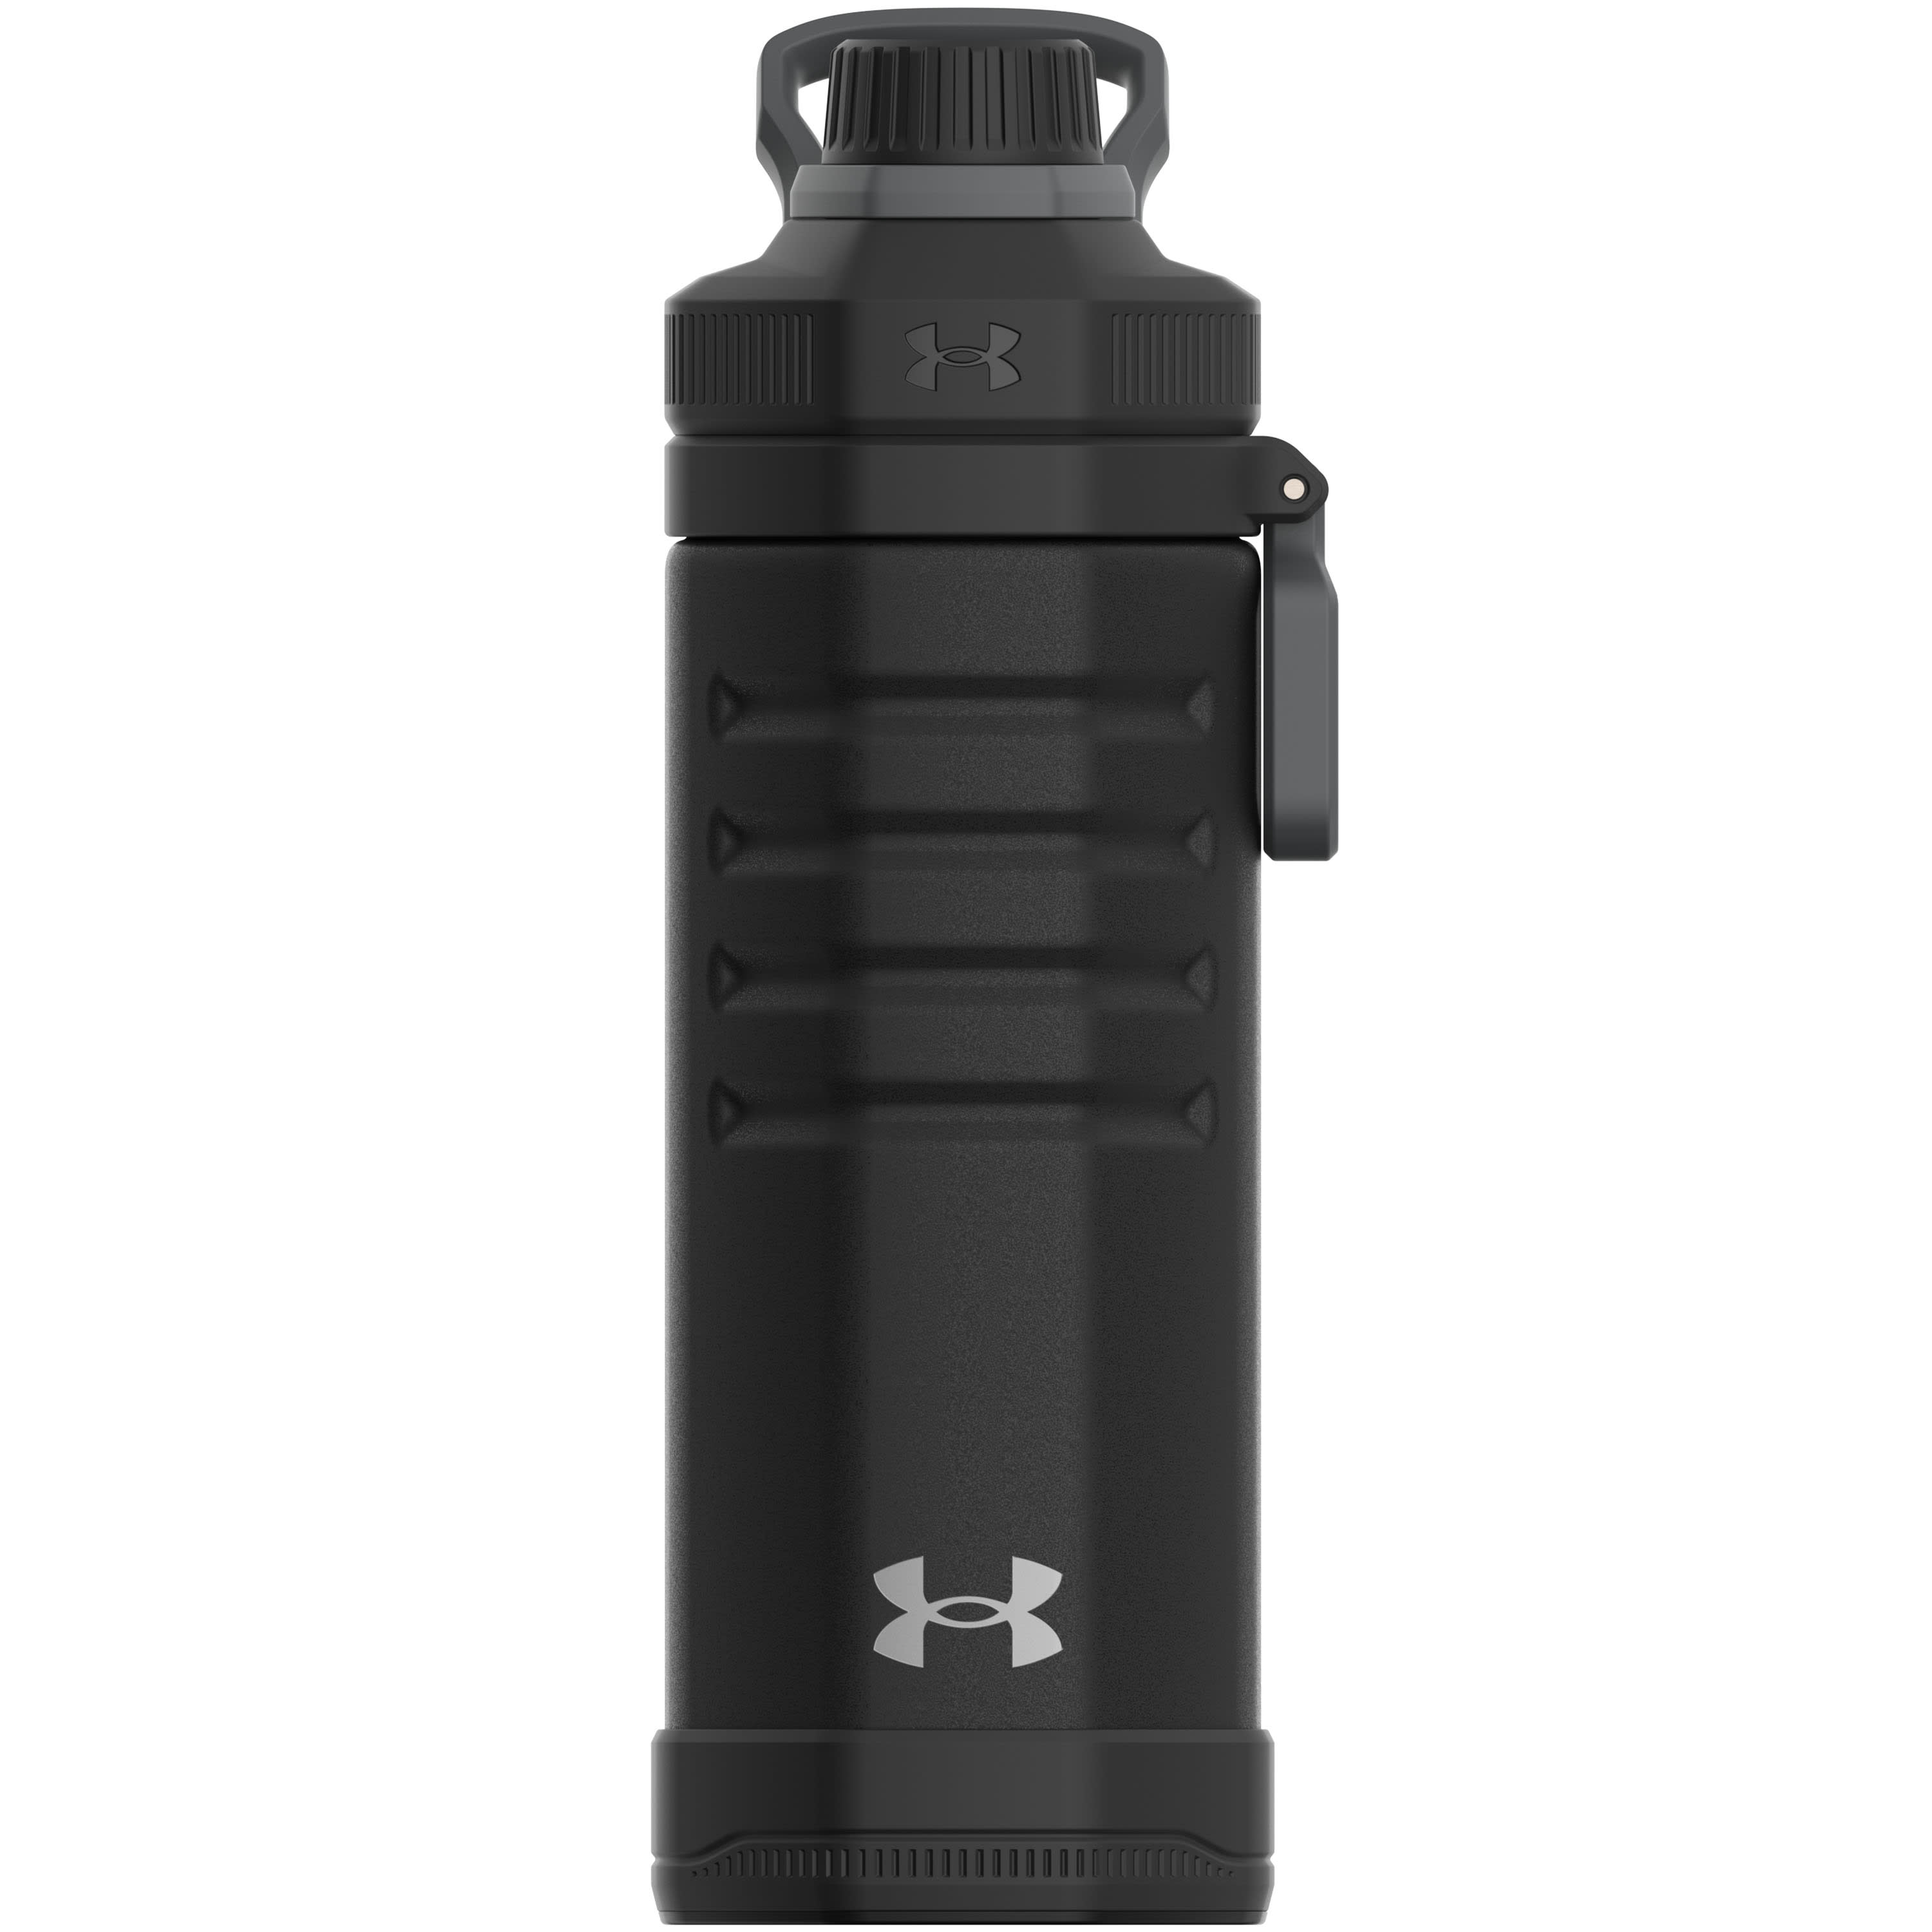 Under Armour Playmaker Sport Jug, Water Bottle with Handle, Foam